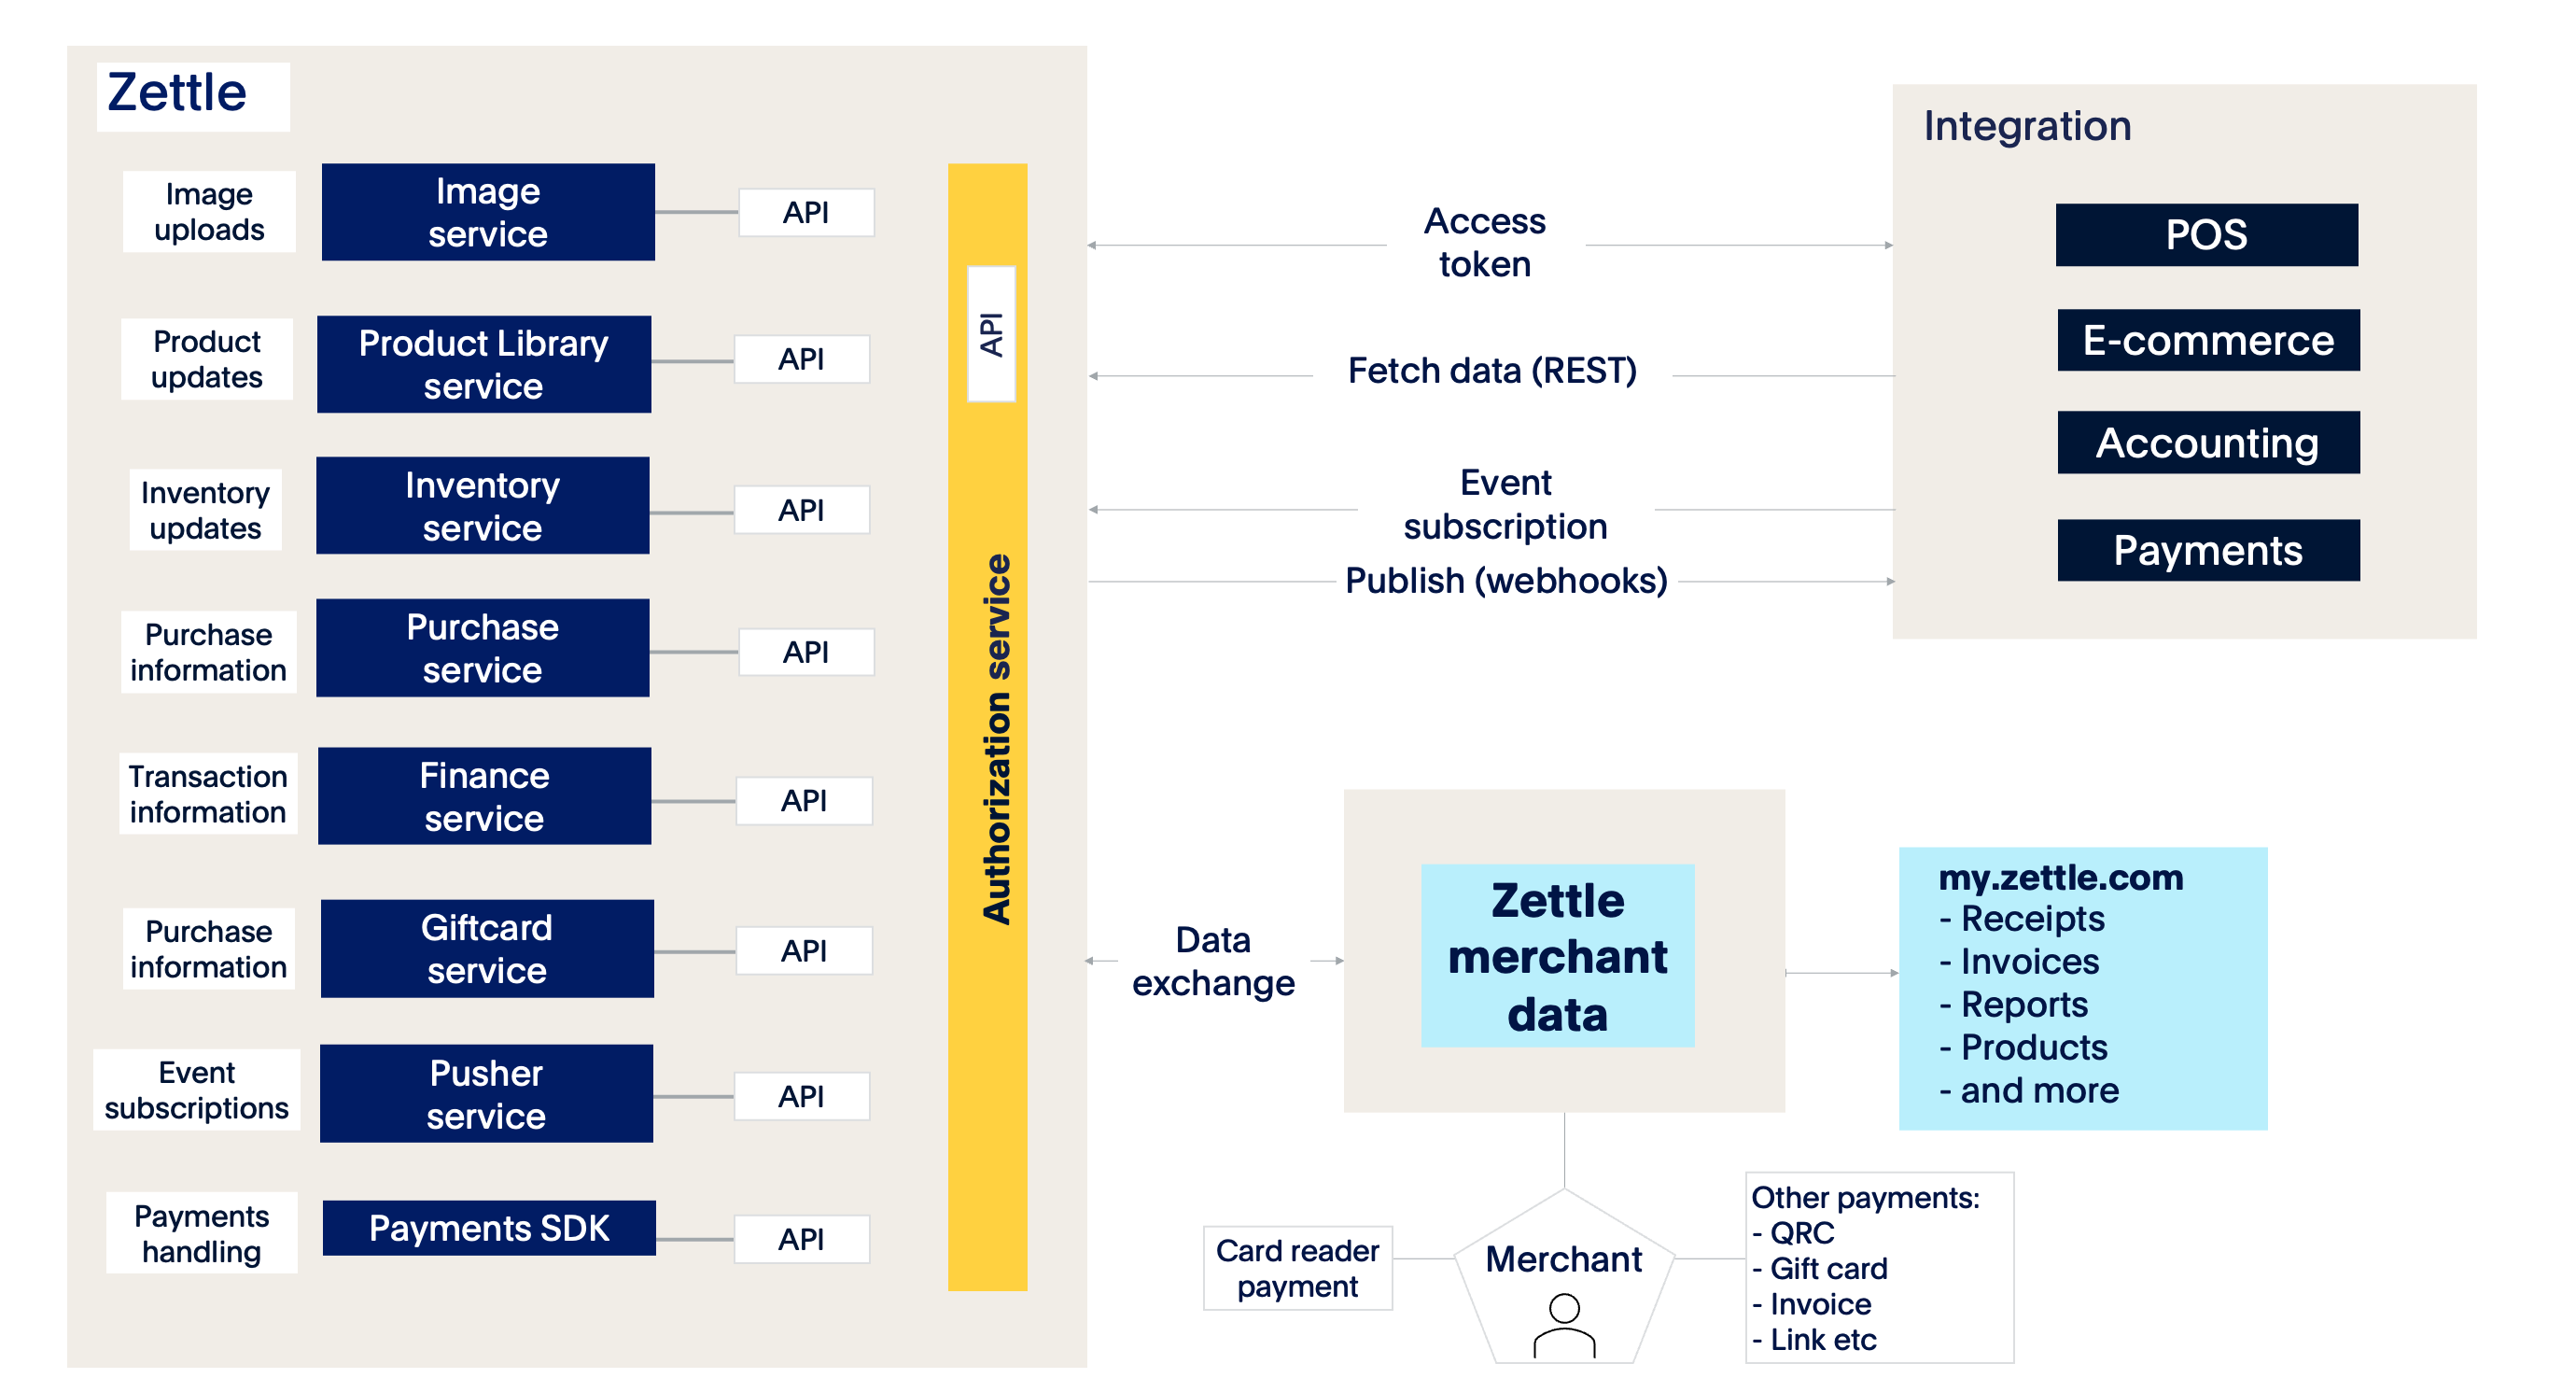 System overview of integrating with Zettle.